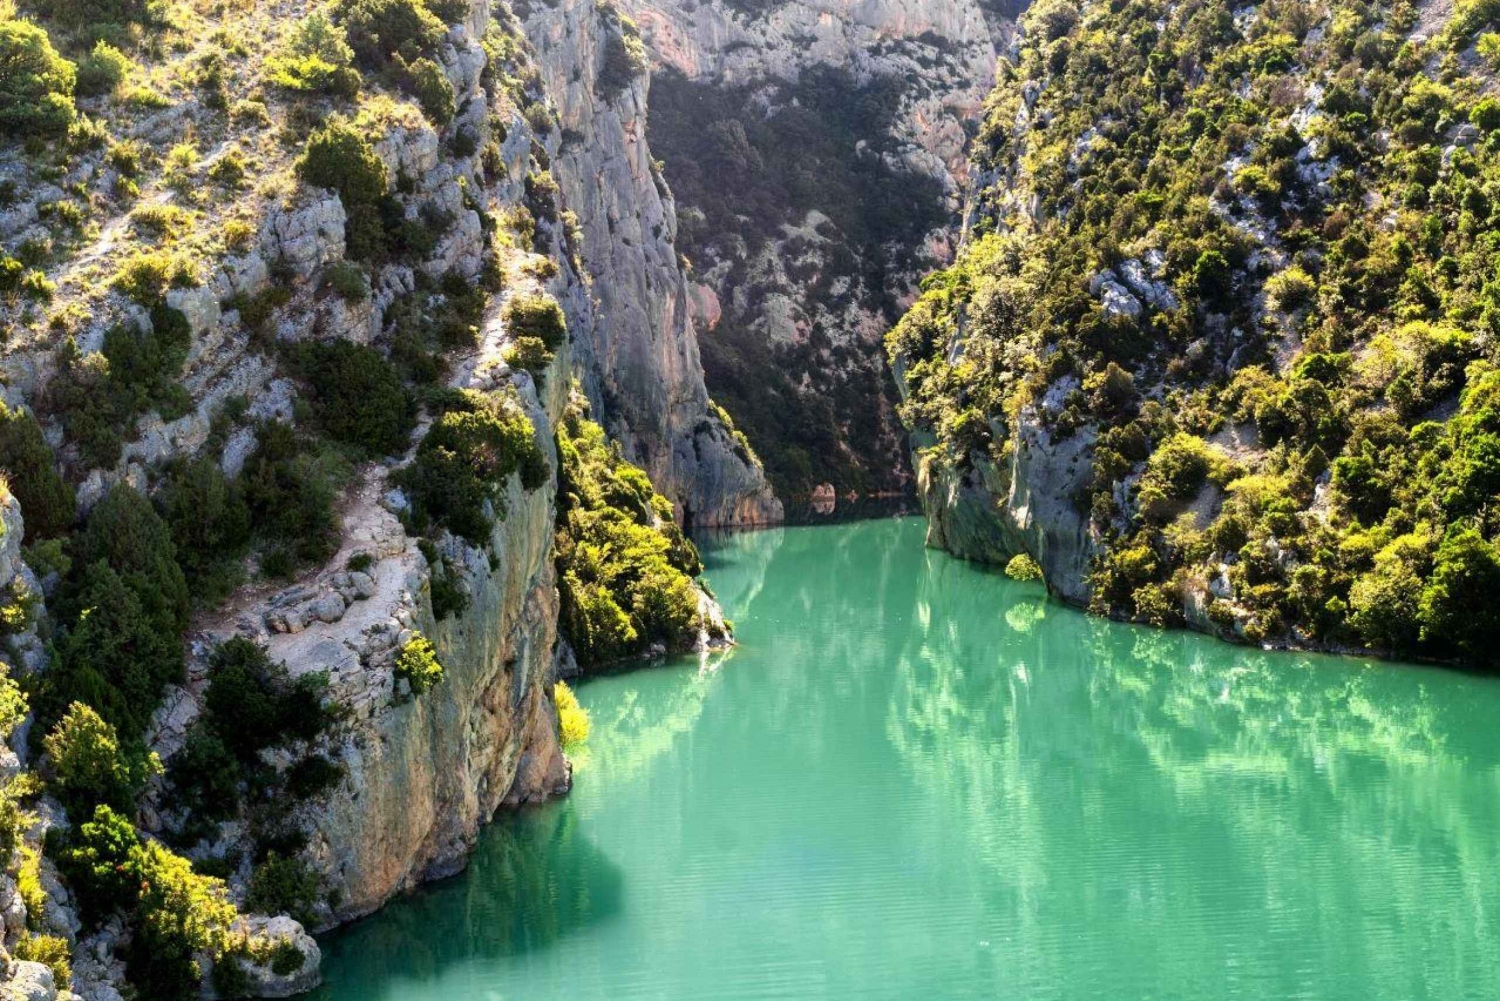 From Cannes: The Largest Canyon of Europe and its Lake